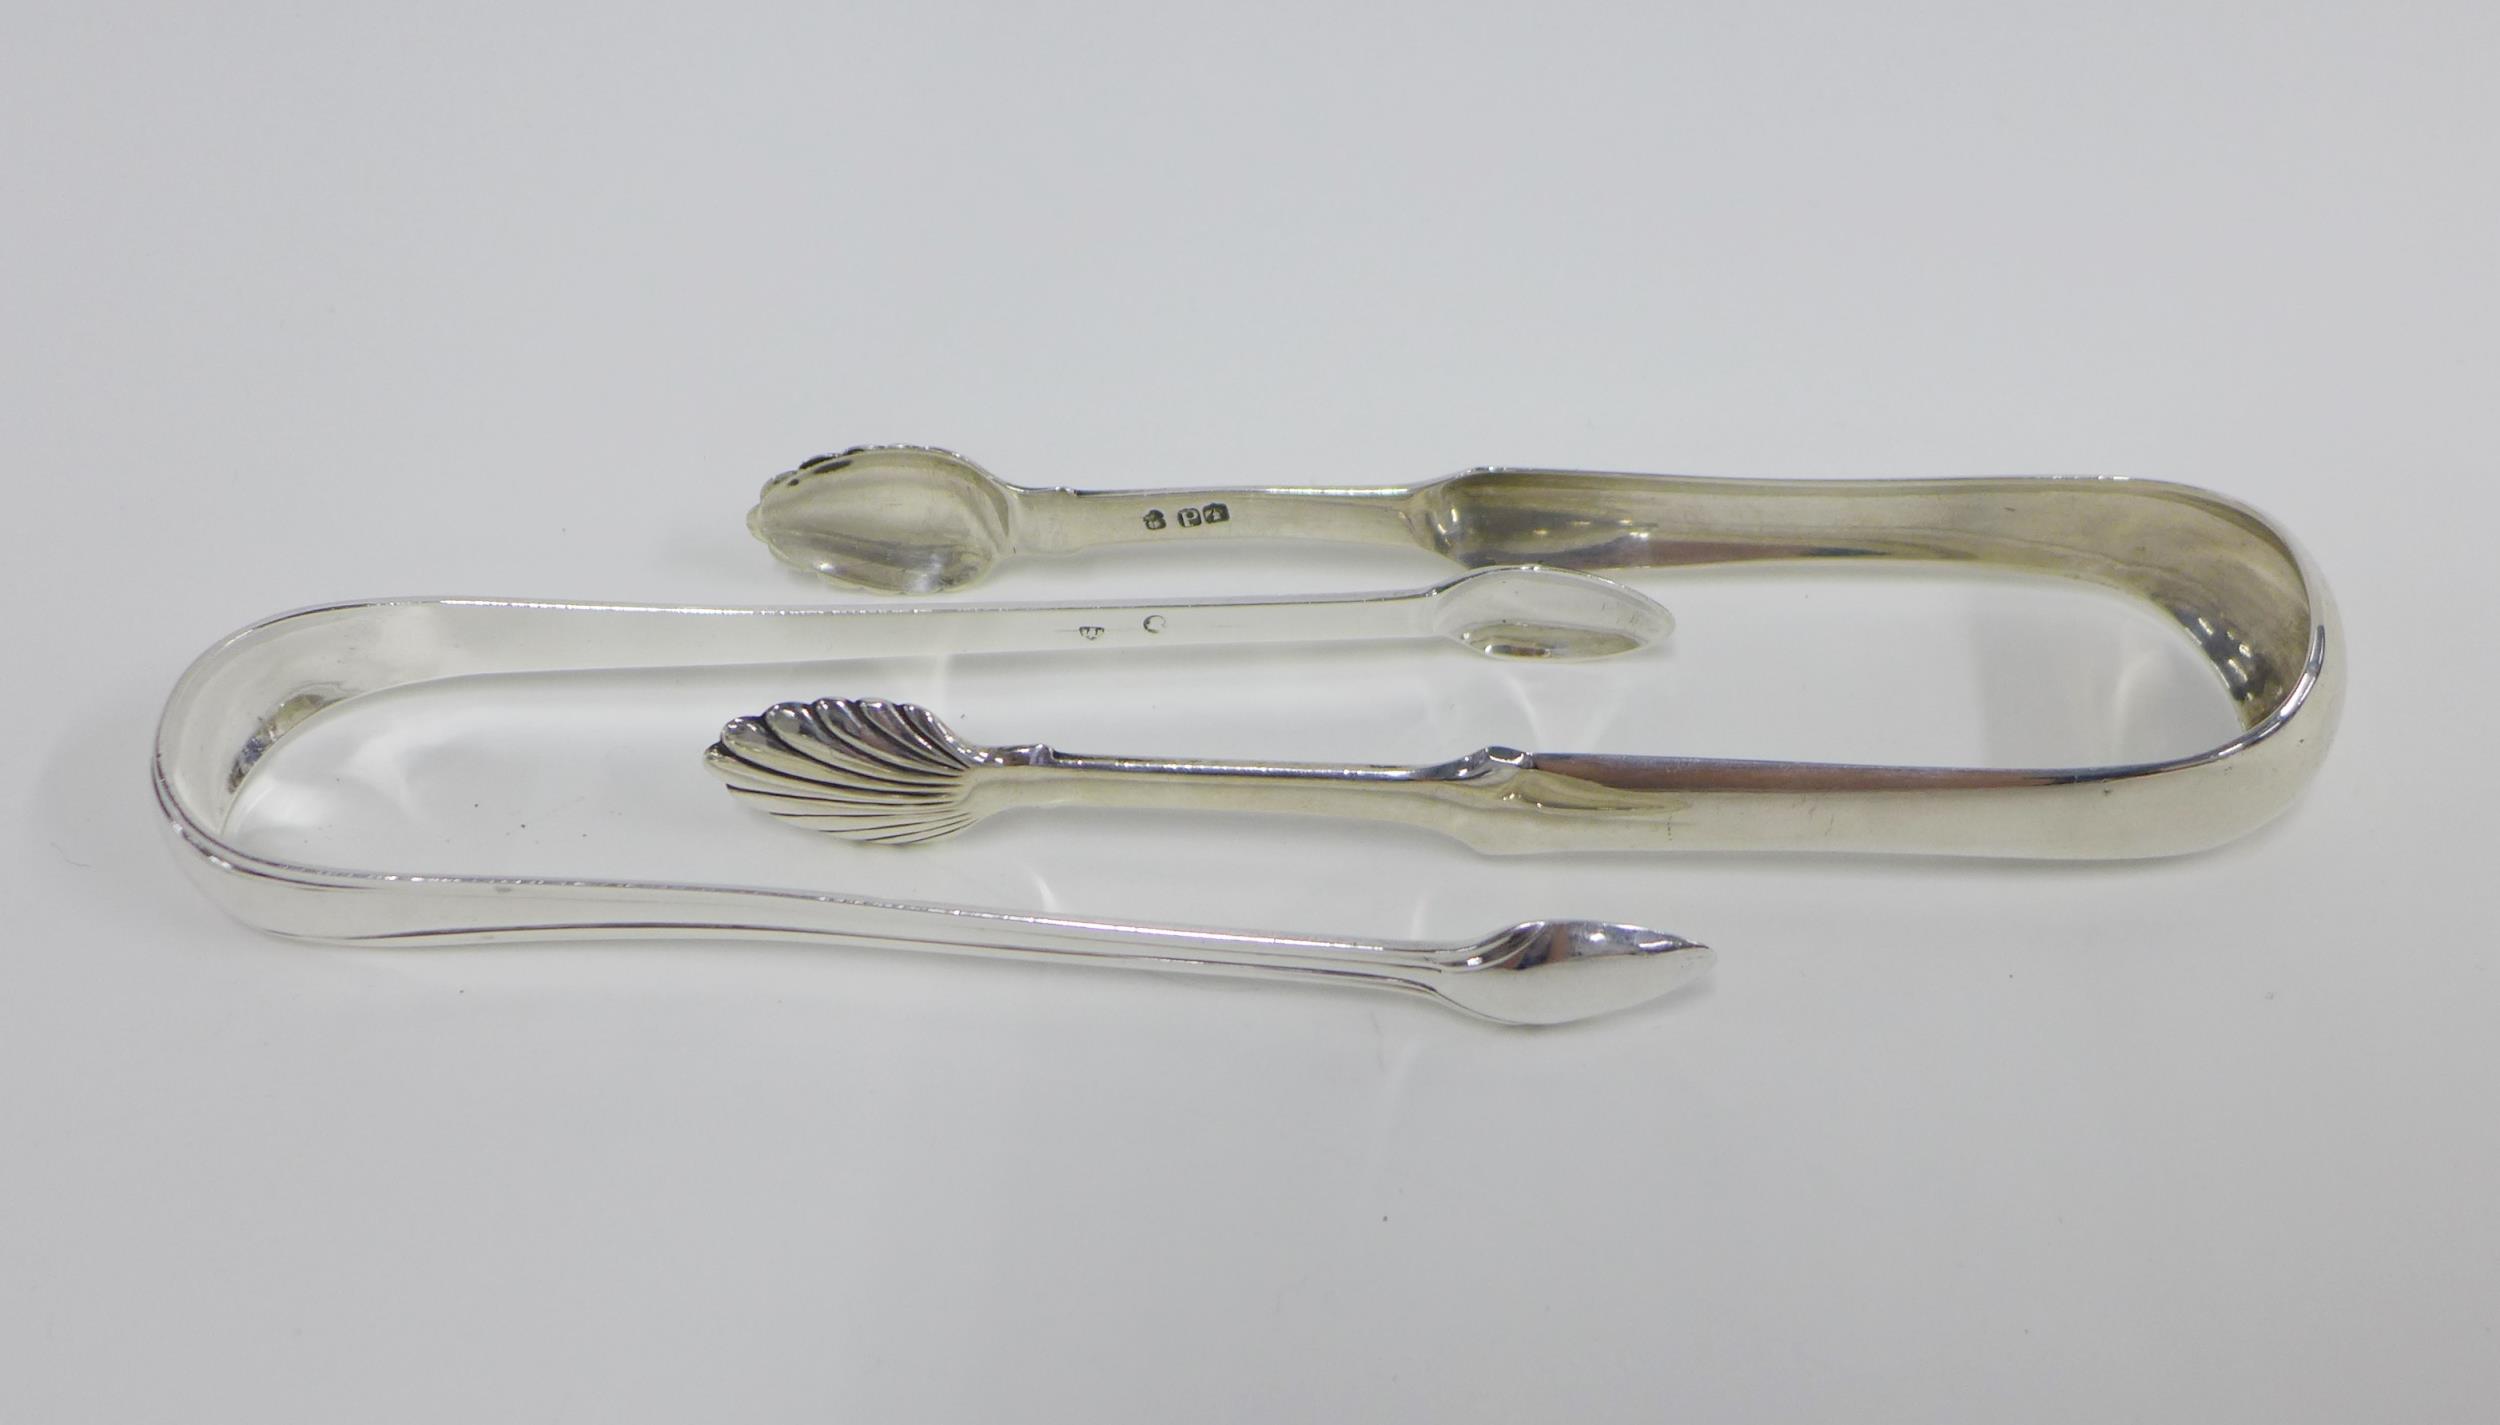 George III Scottish silver sugar tongs c1790 likely by James Wemyss and another set with shell bowls